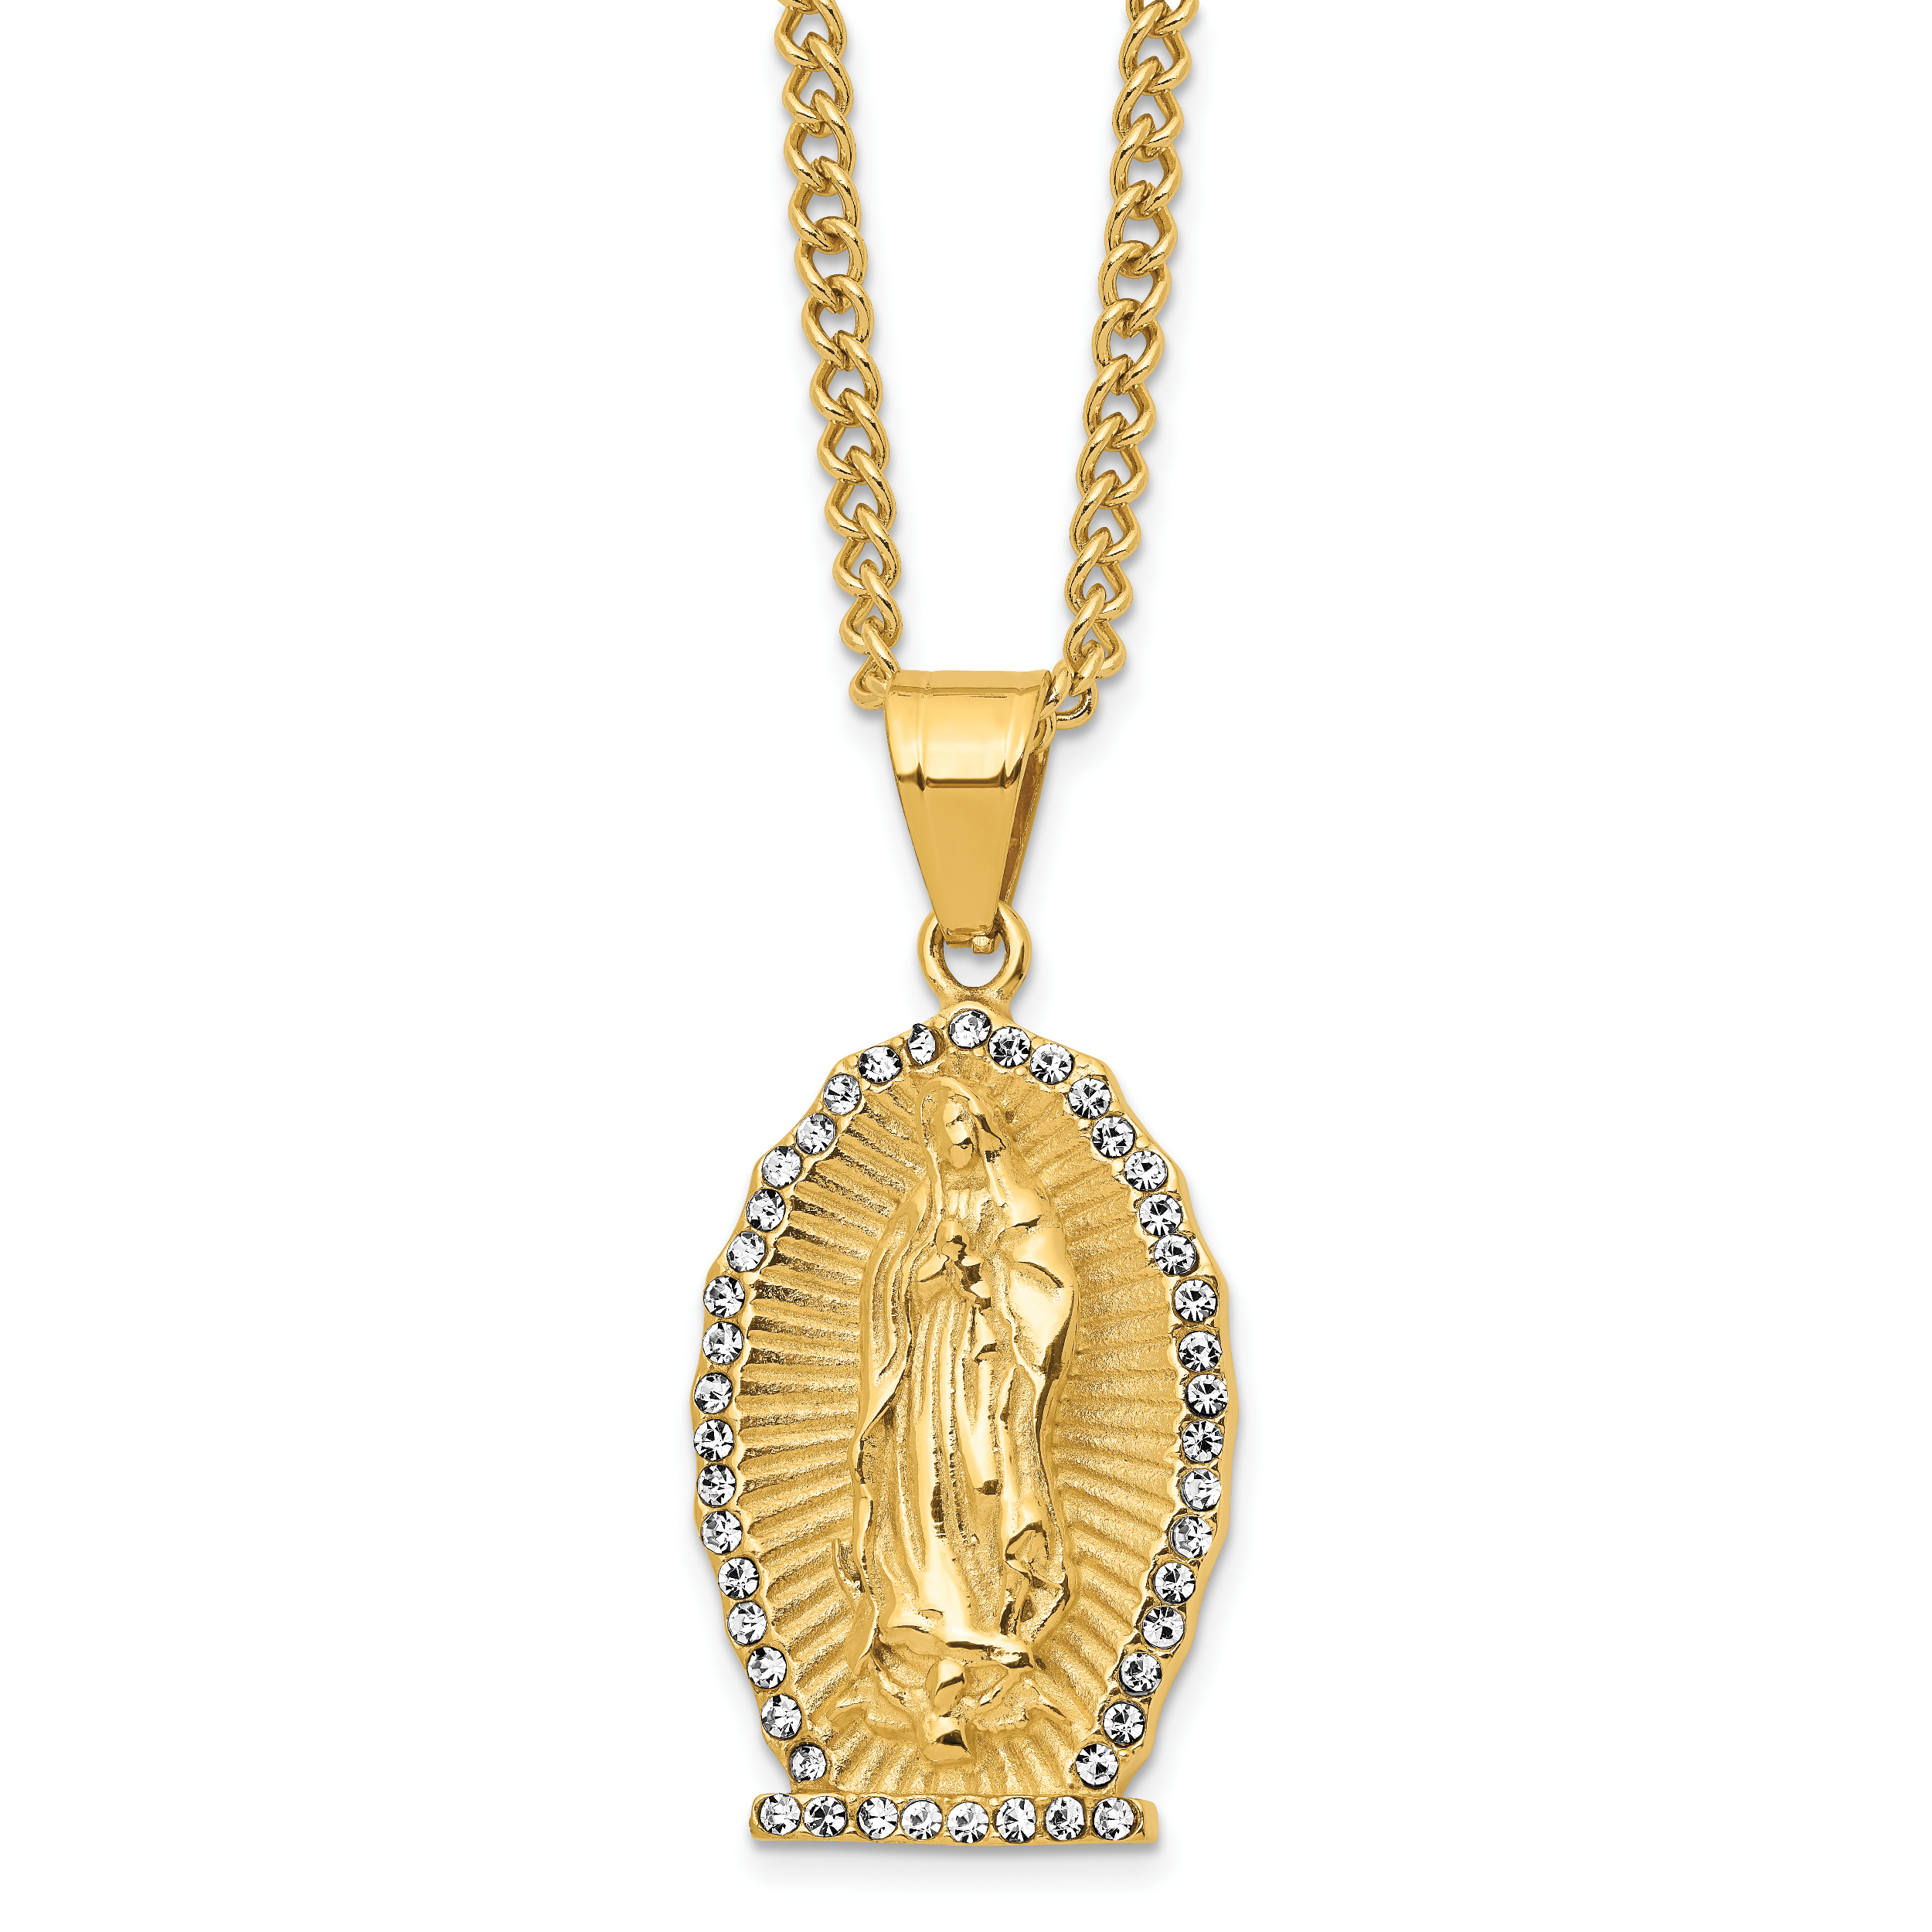 14k Gold Tri-Tone Our Lady of Guadalupe Pendant Necklace